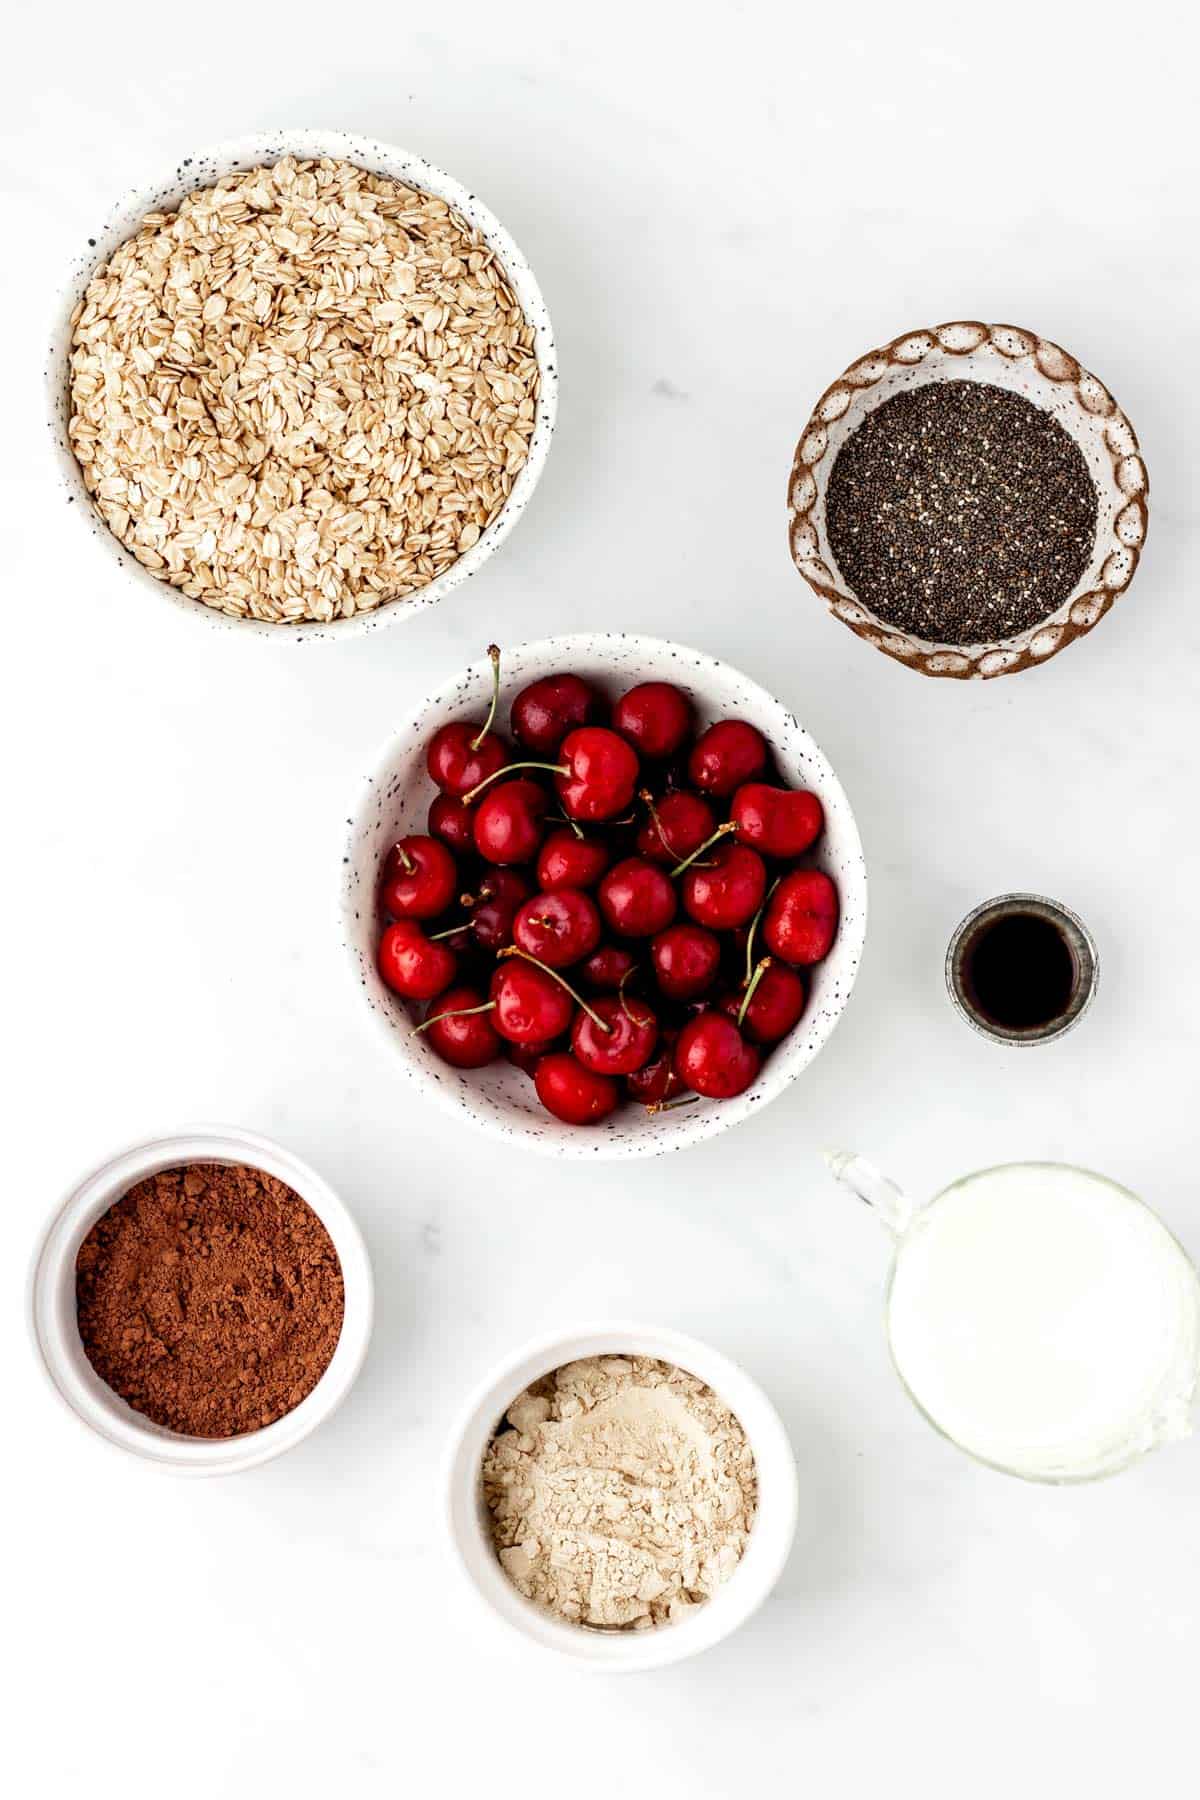 Ingredients for chocolate cherry overnight oats.